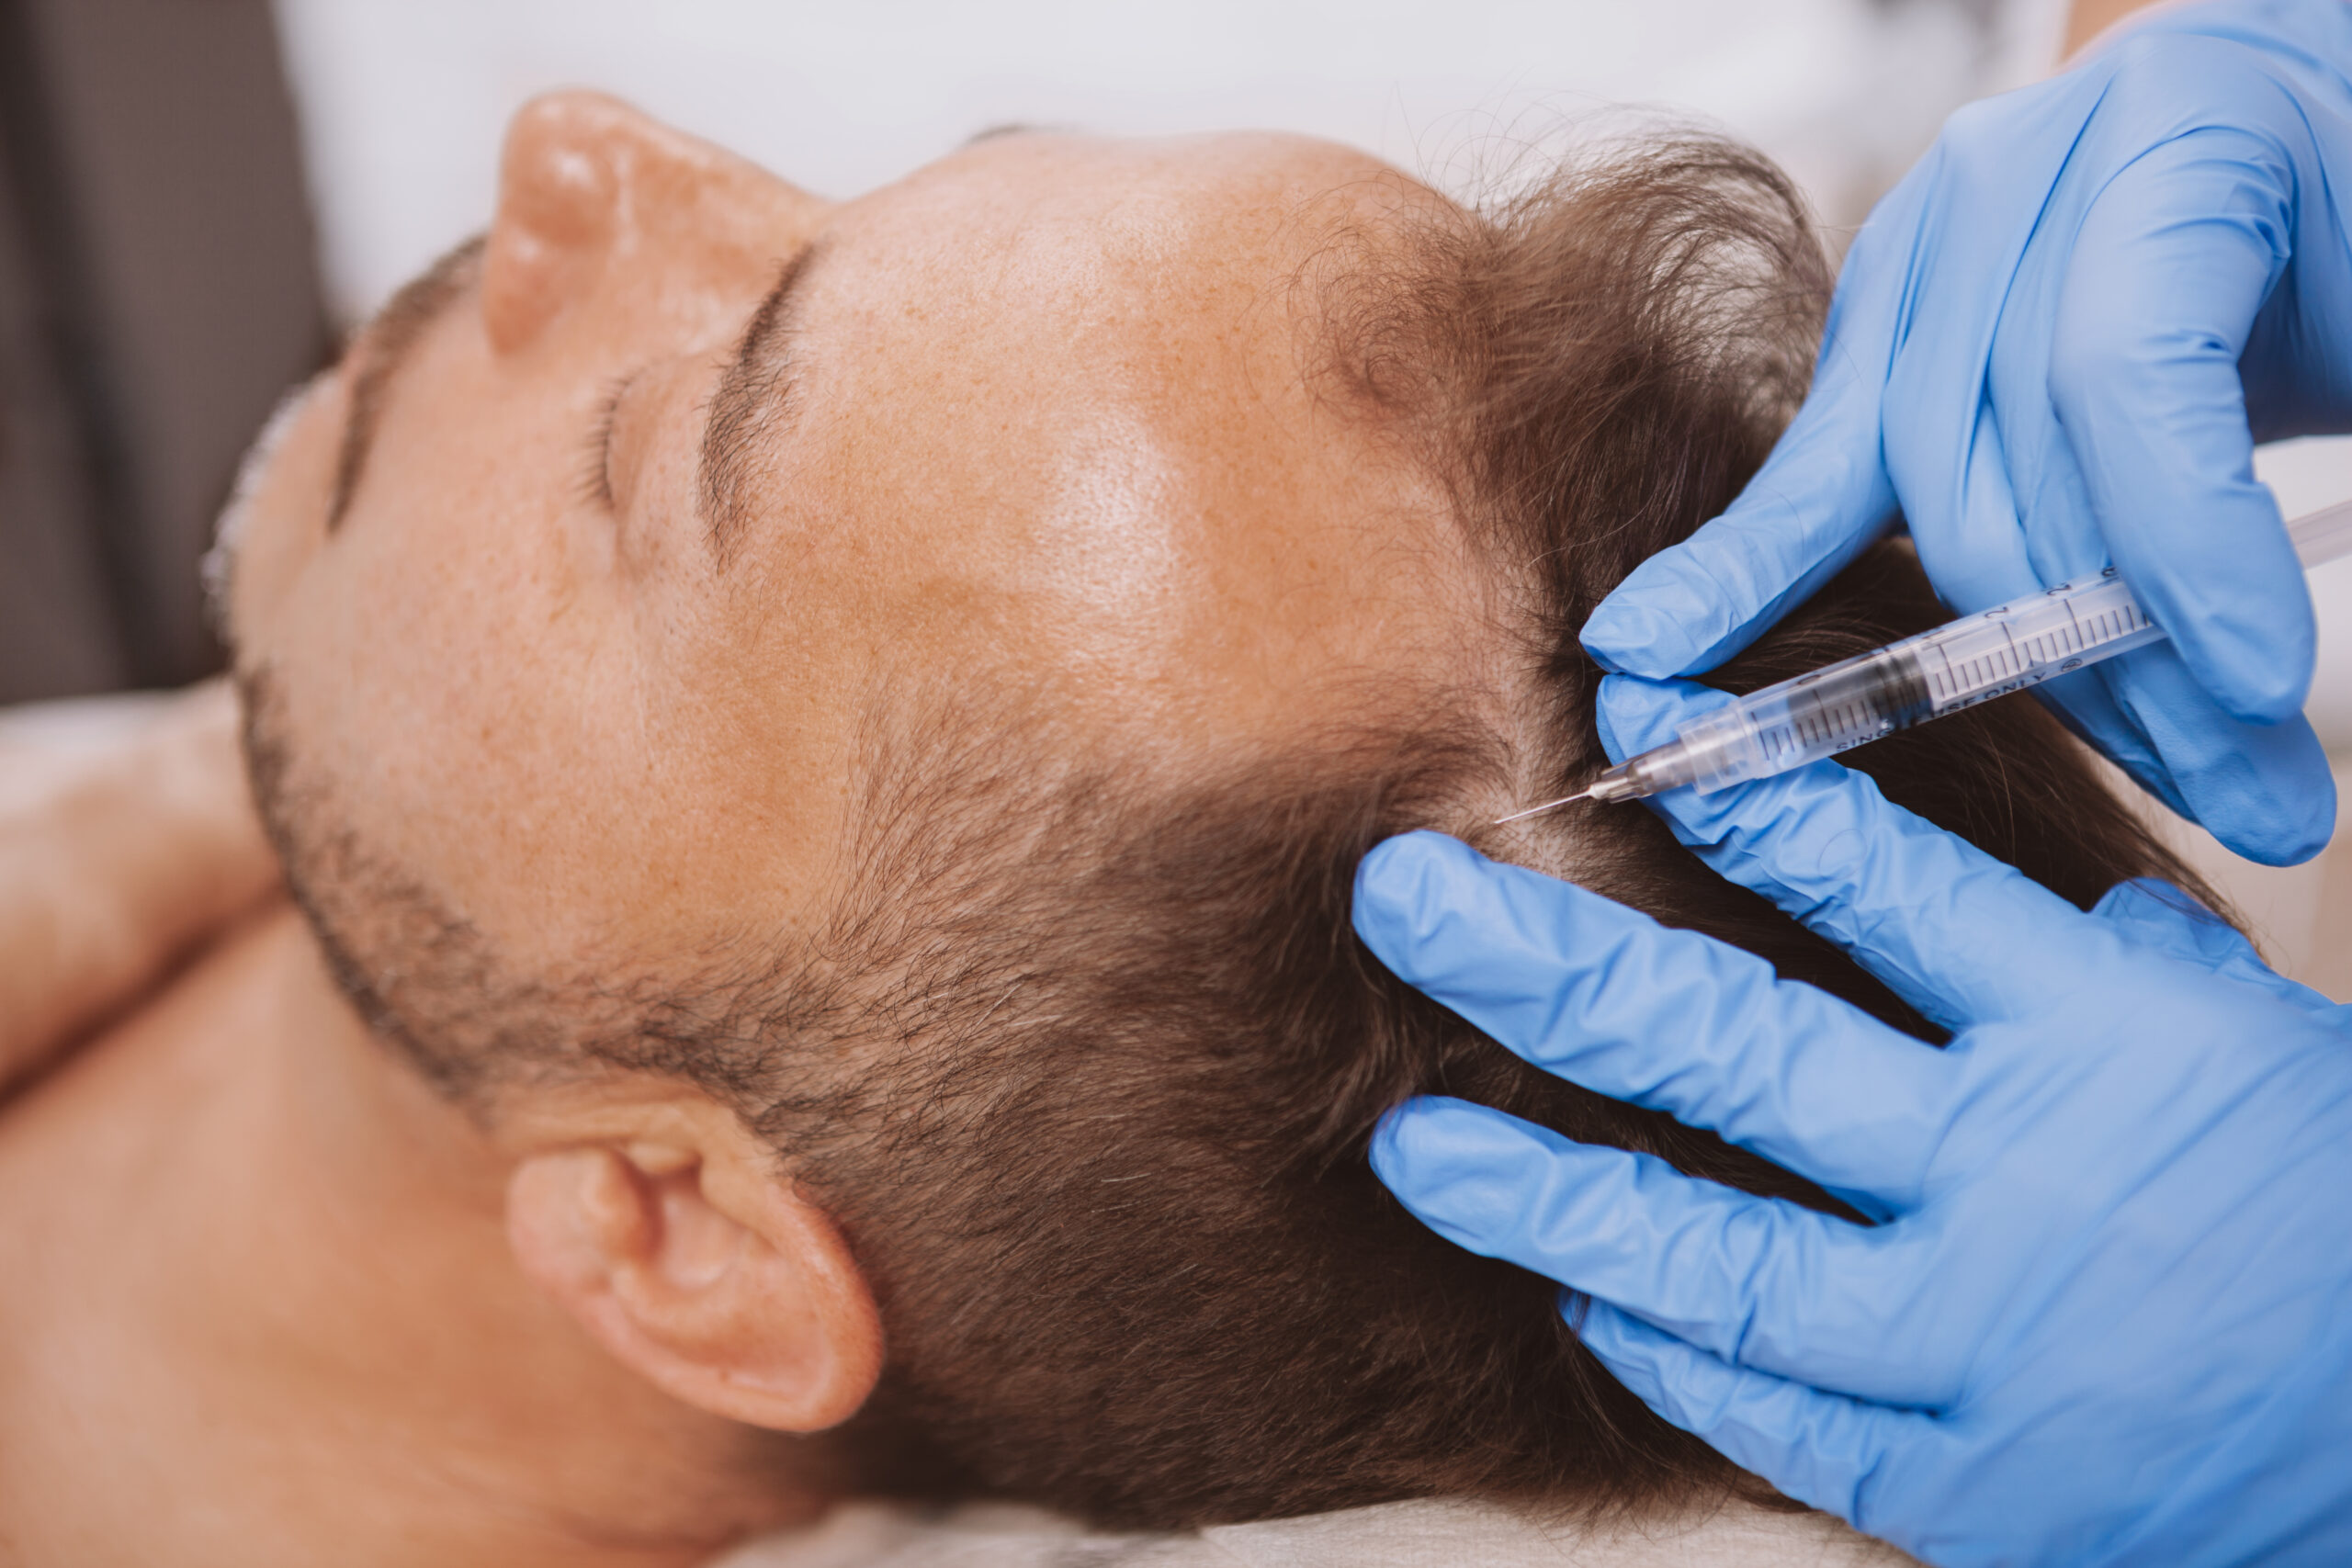 PRP Treatment for Hair Loss: How Platelet Rich Plasma Can Help Promote Hair Growth